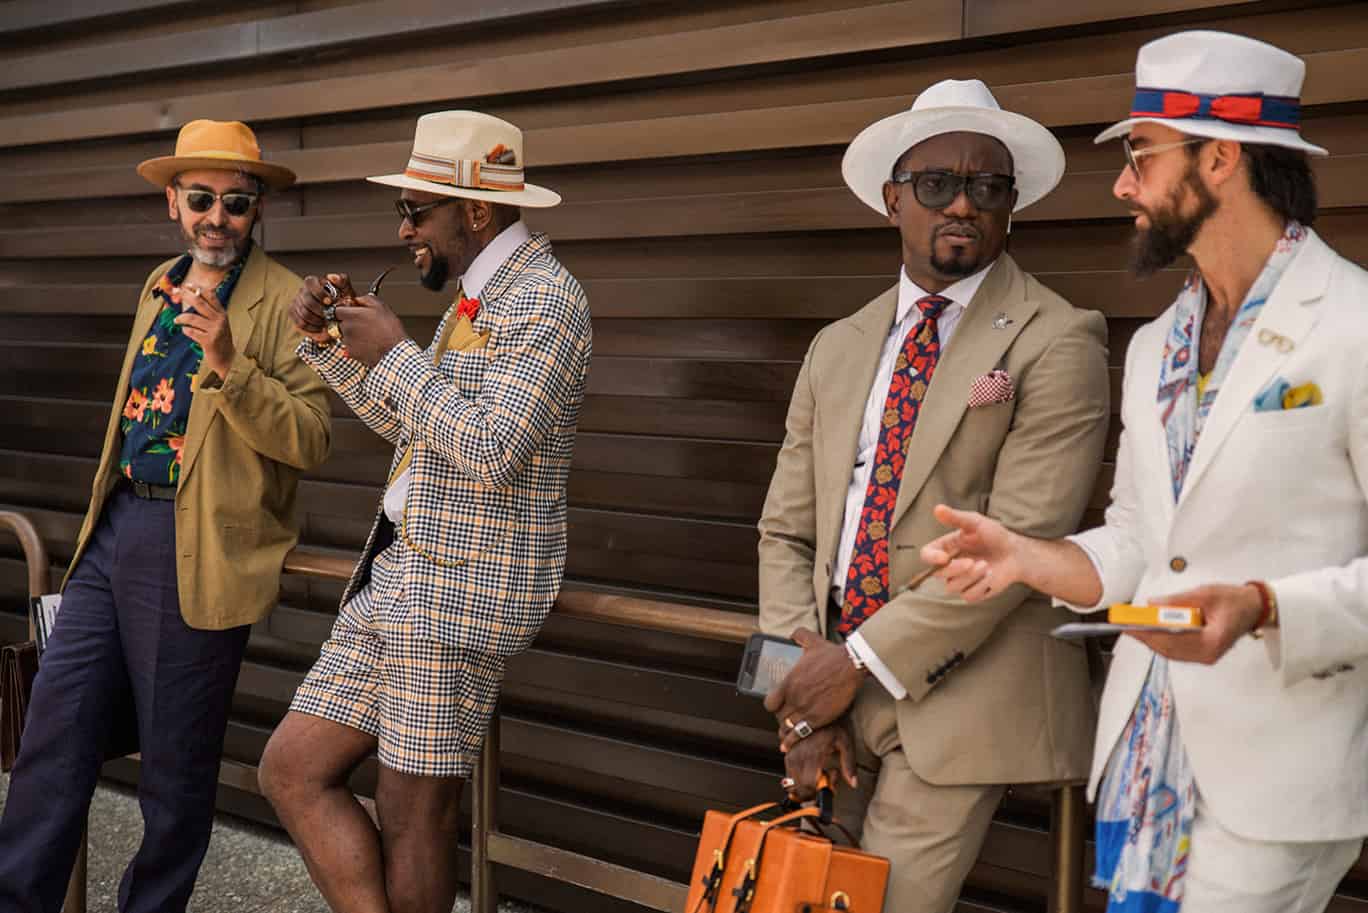 PITTI PEOPLE: THE BEST LOOKS FROM DAY TWO OF PITTI UOMO - MR Magazine